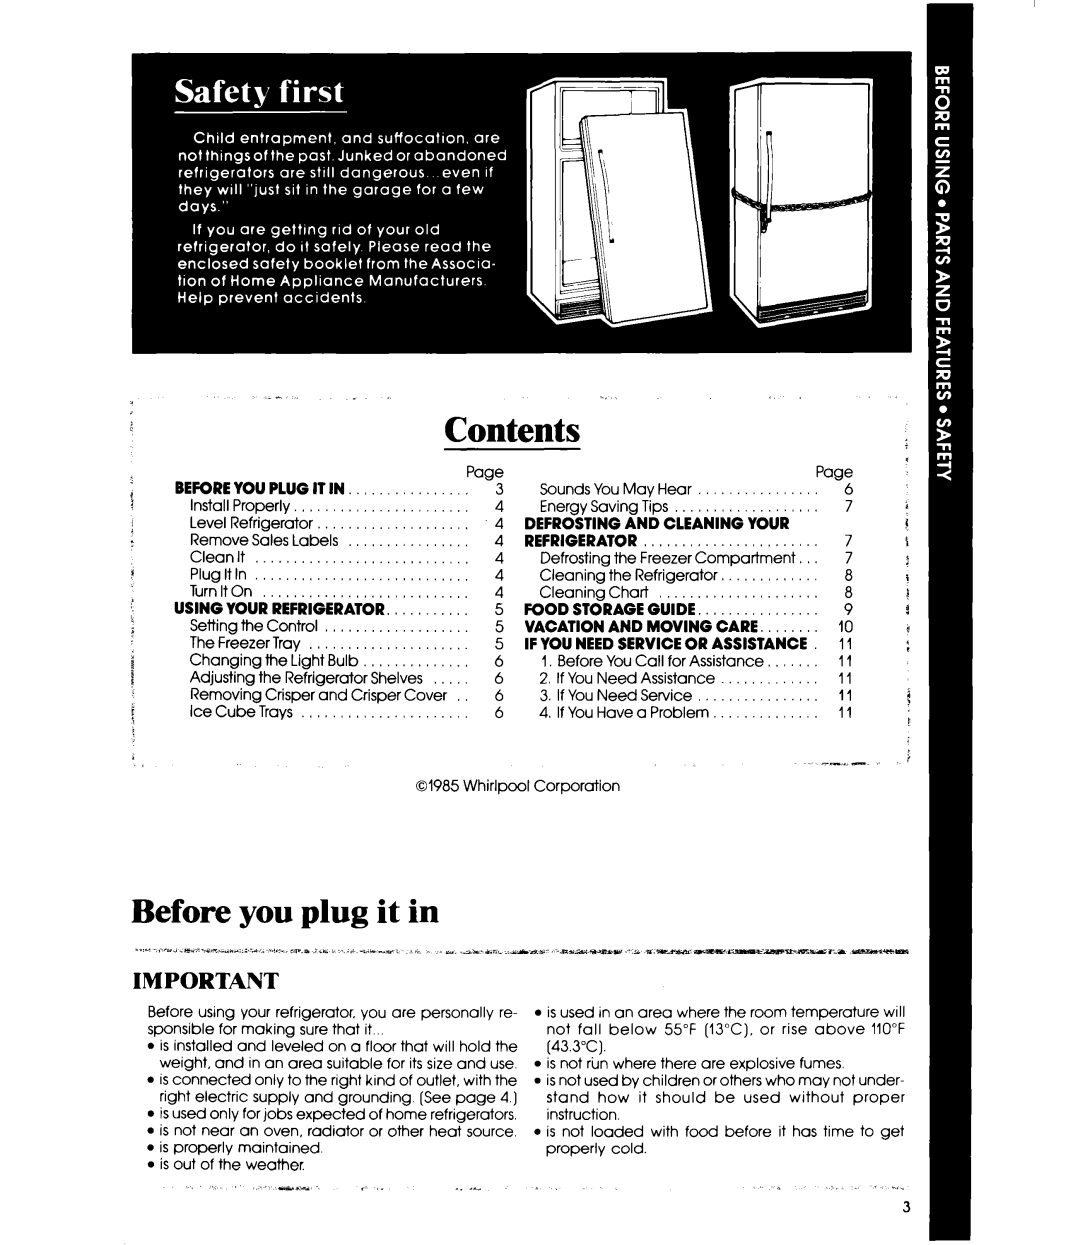 Whirlpool EL11PC manual Contents, Before you plug it in 